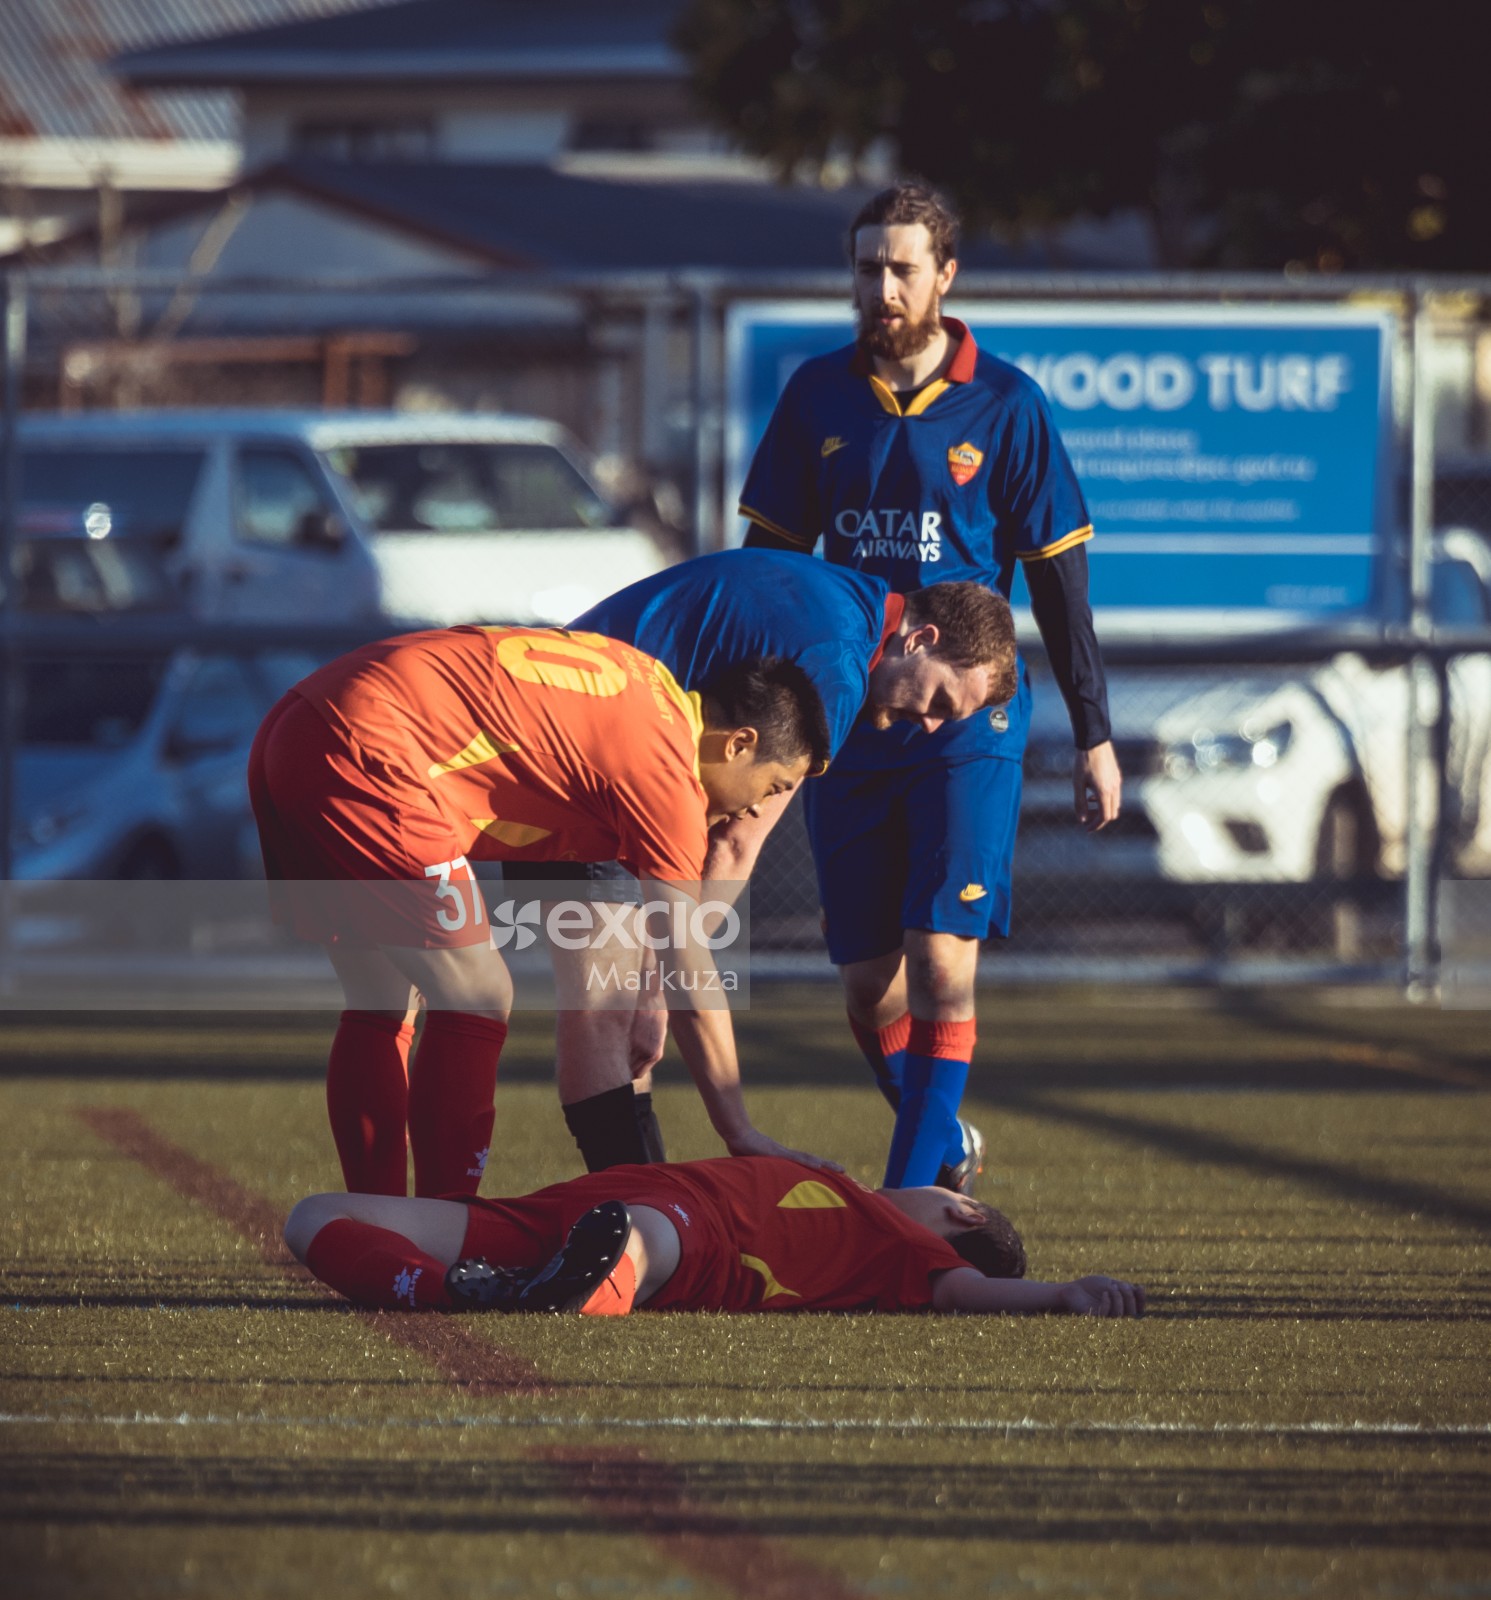 Injured player in red jersey lying on the ground - Sports Zone sunday league